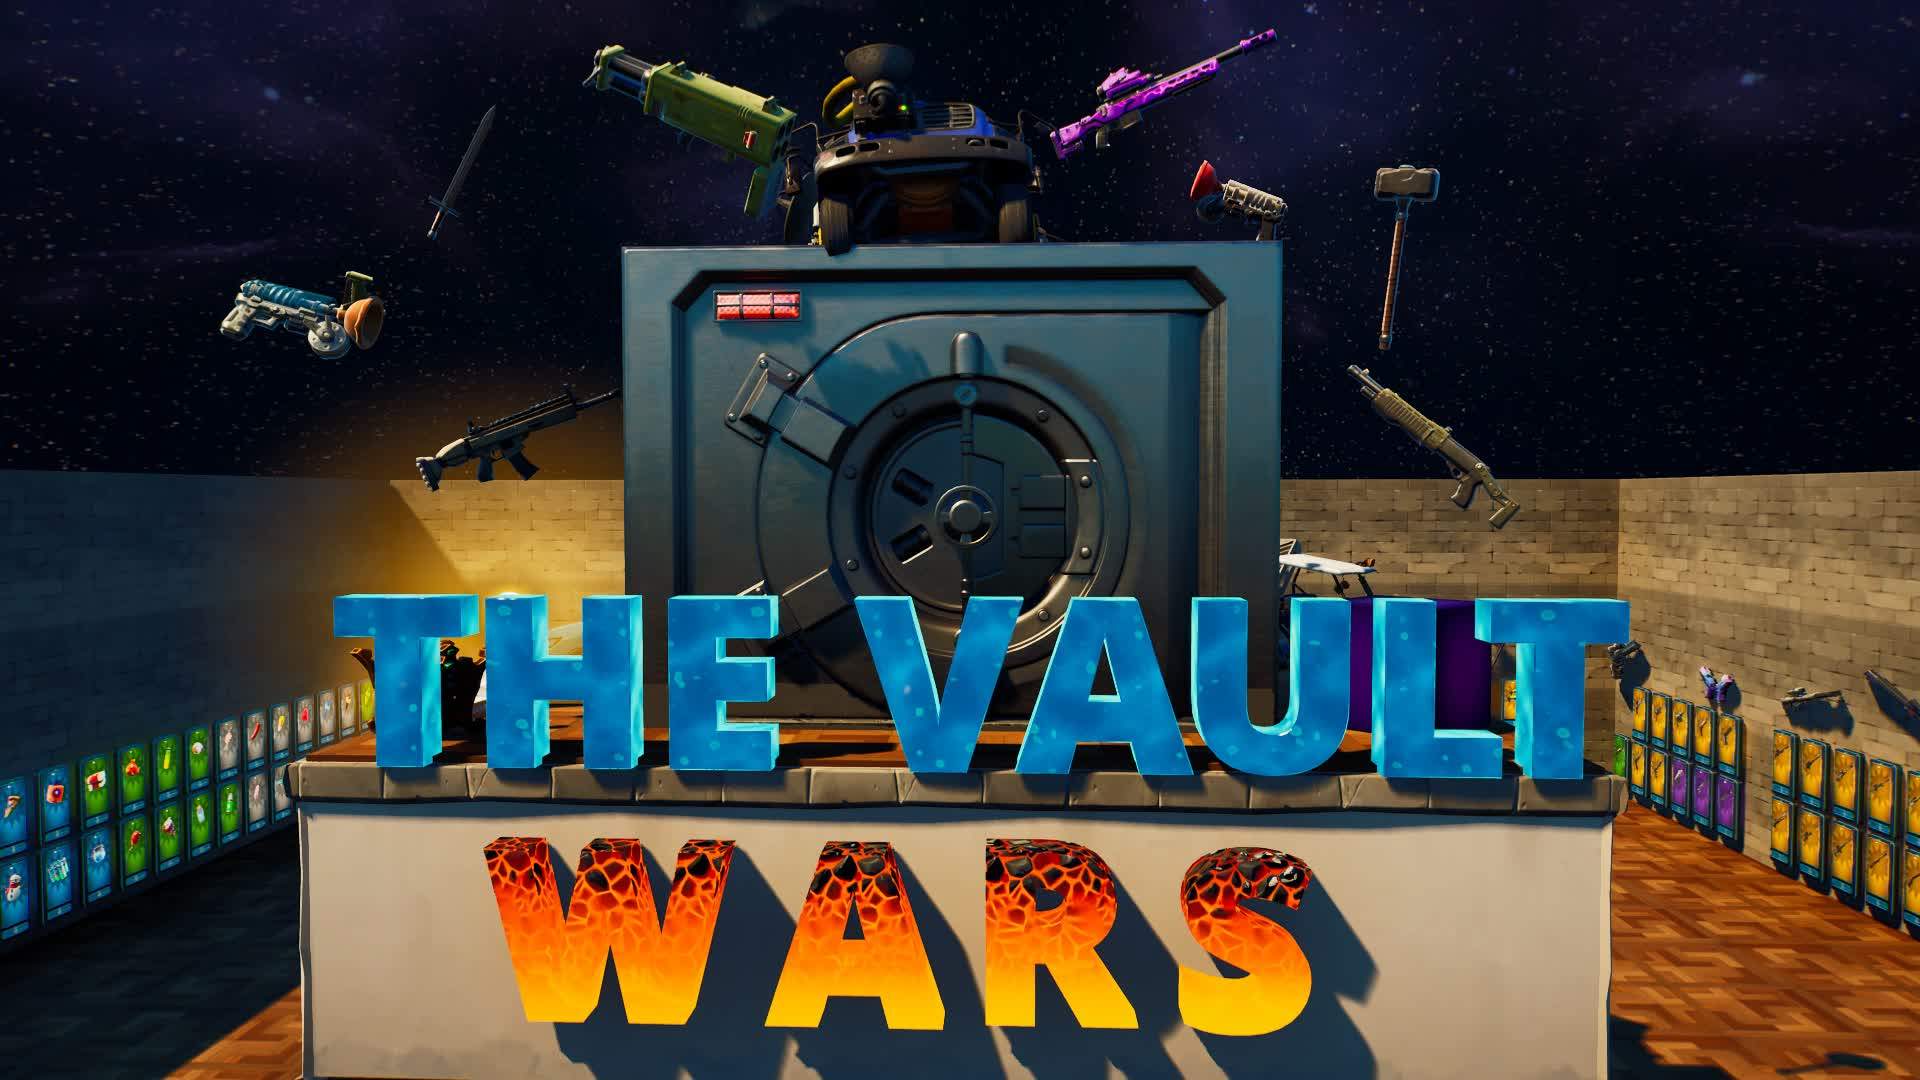 *MOTORCYCLES* VAULT WARS - FREE FOR ALL